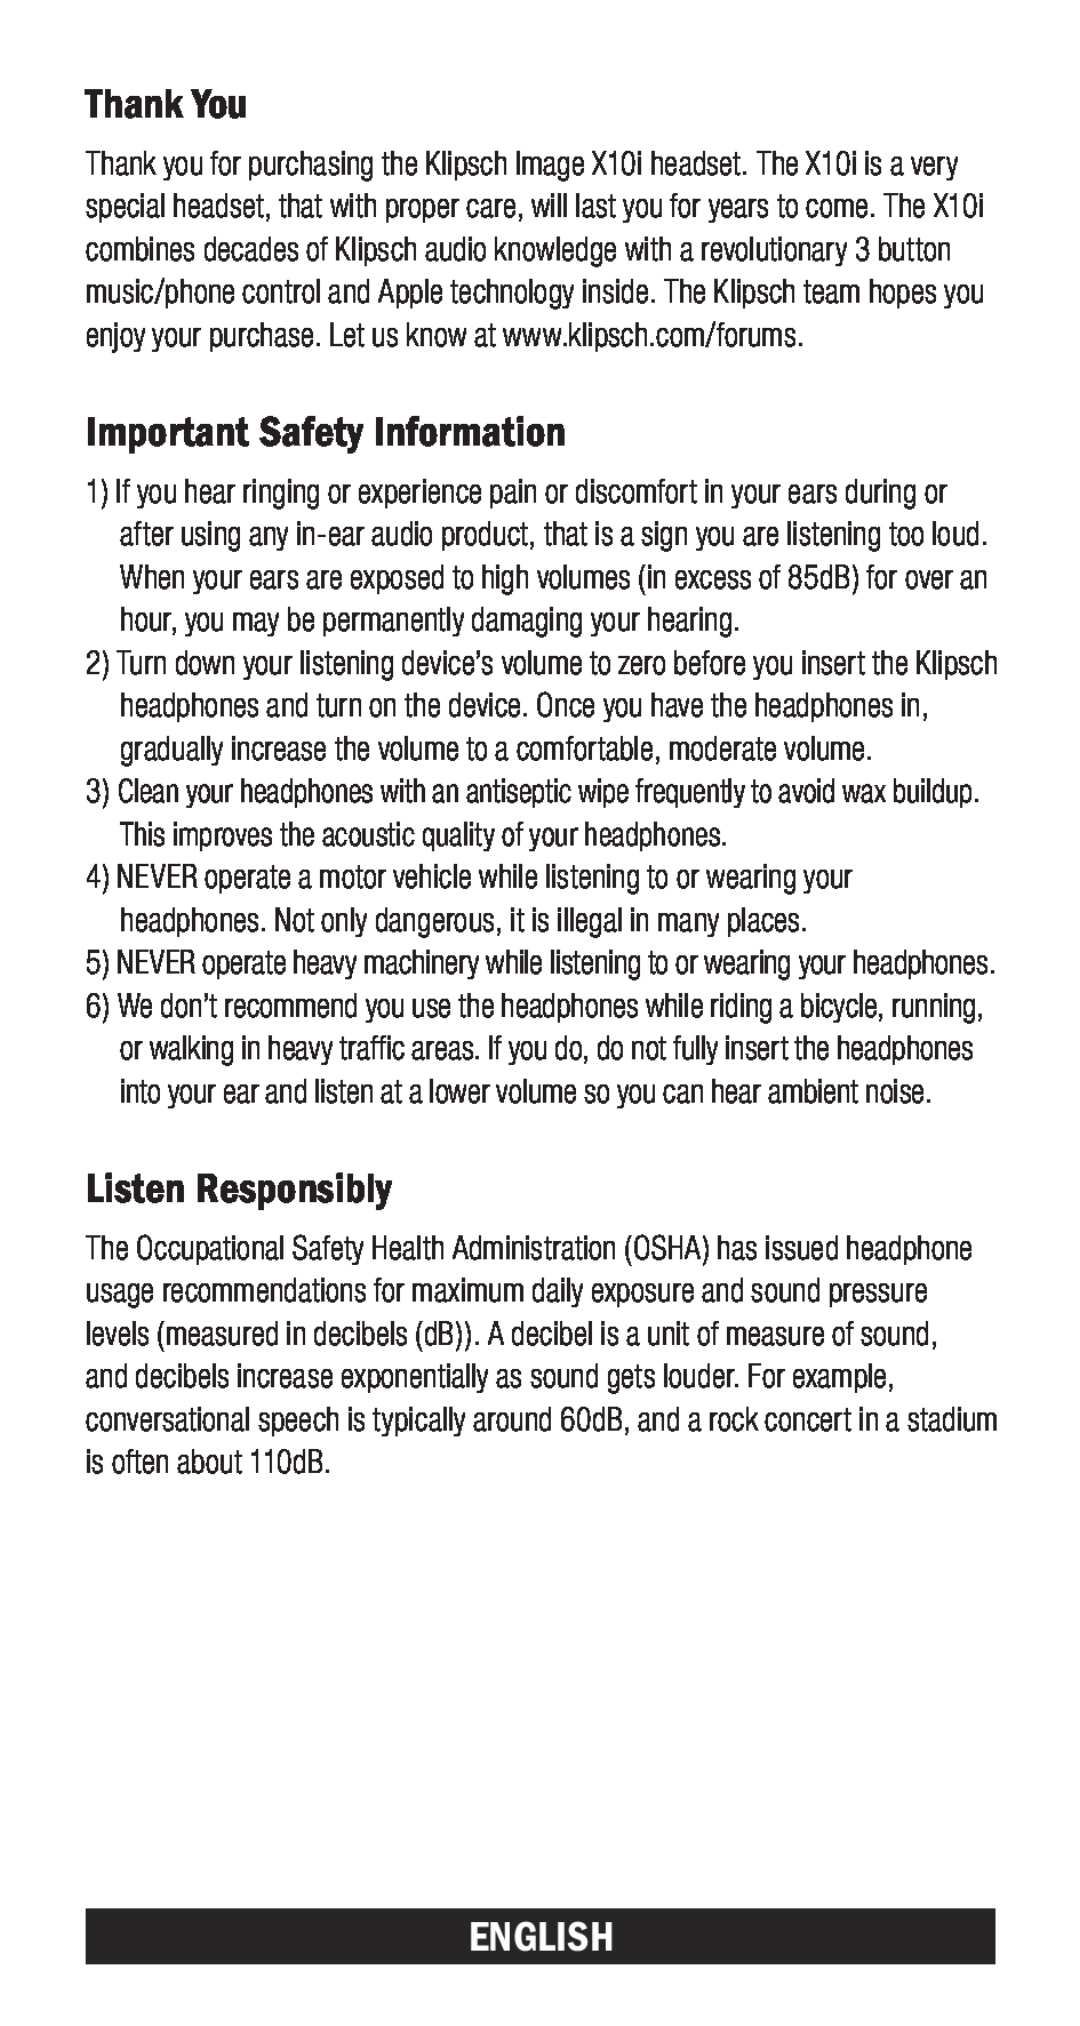 Klipsch X10I owner manual Thank You, Important Safety Information, Listen Responsibly, English 